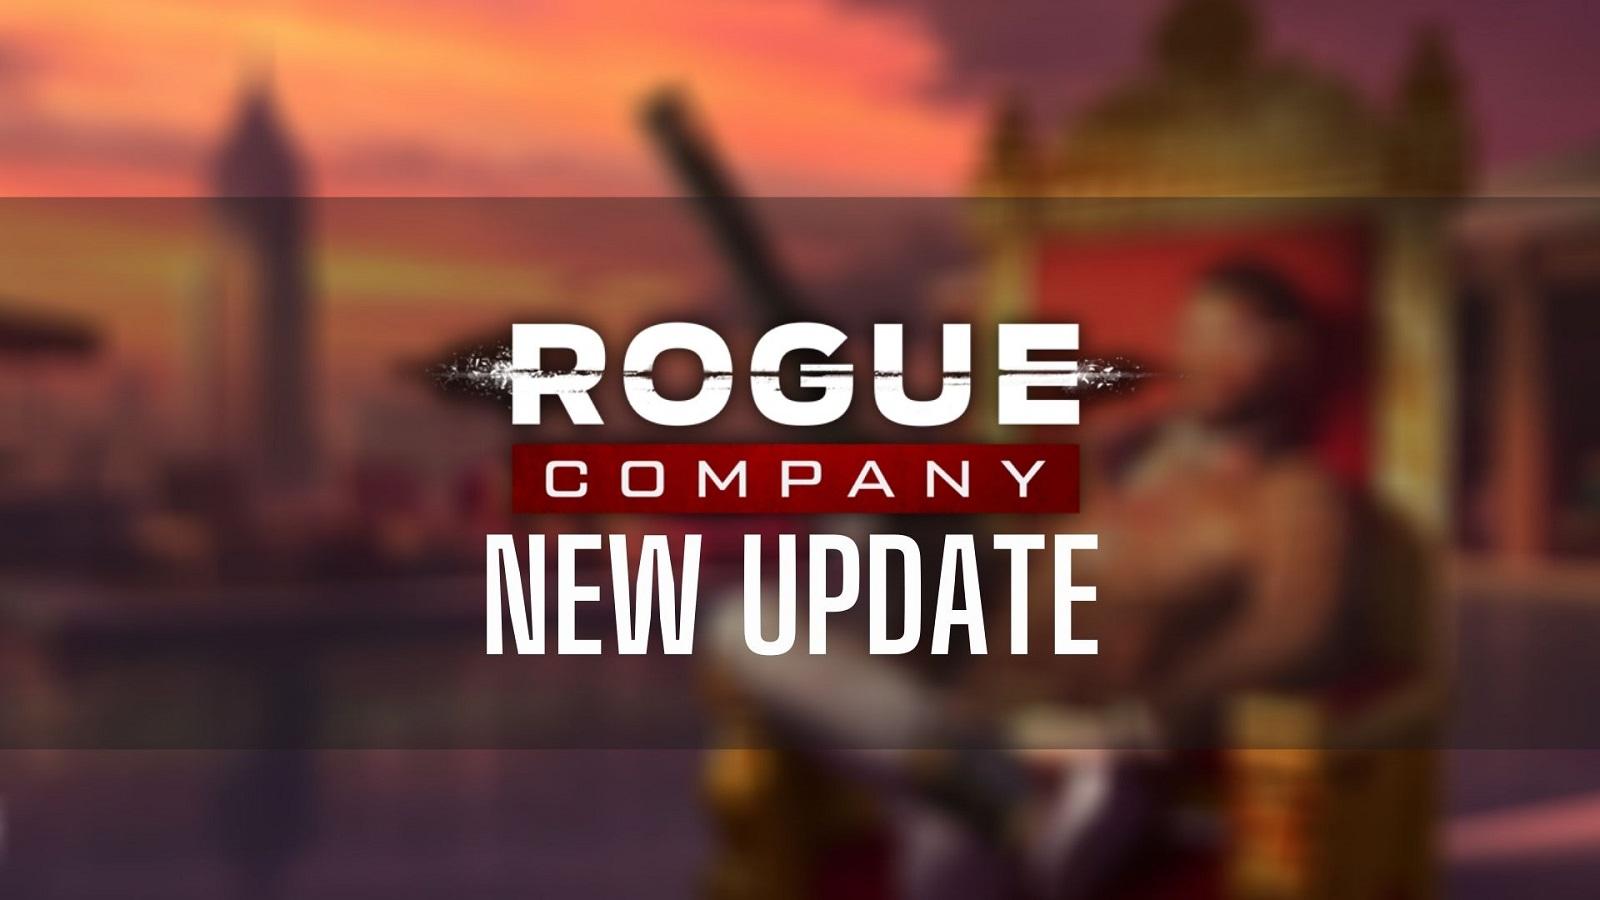 Rogue Company new update